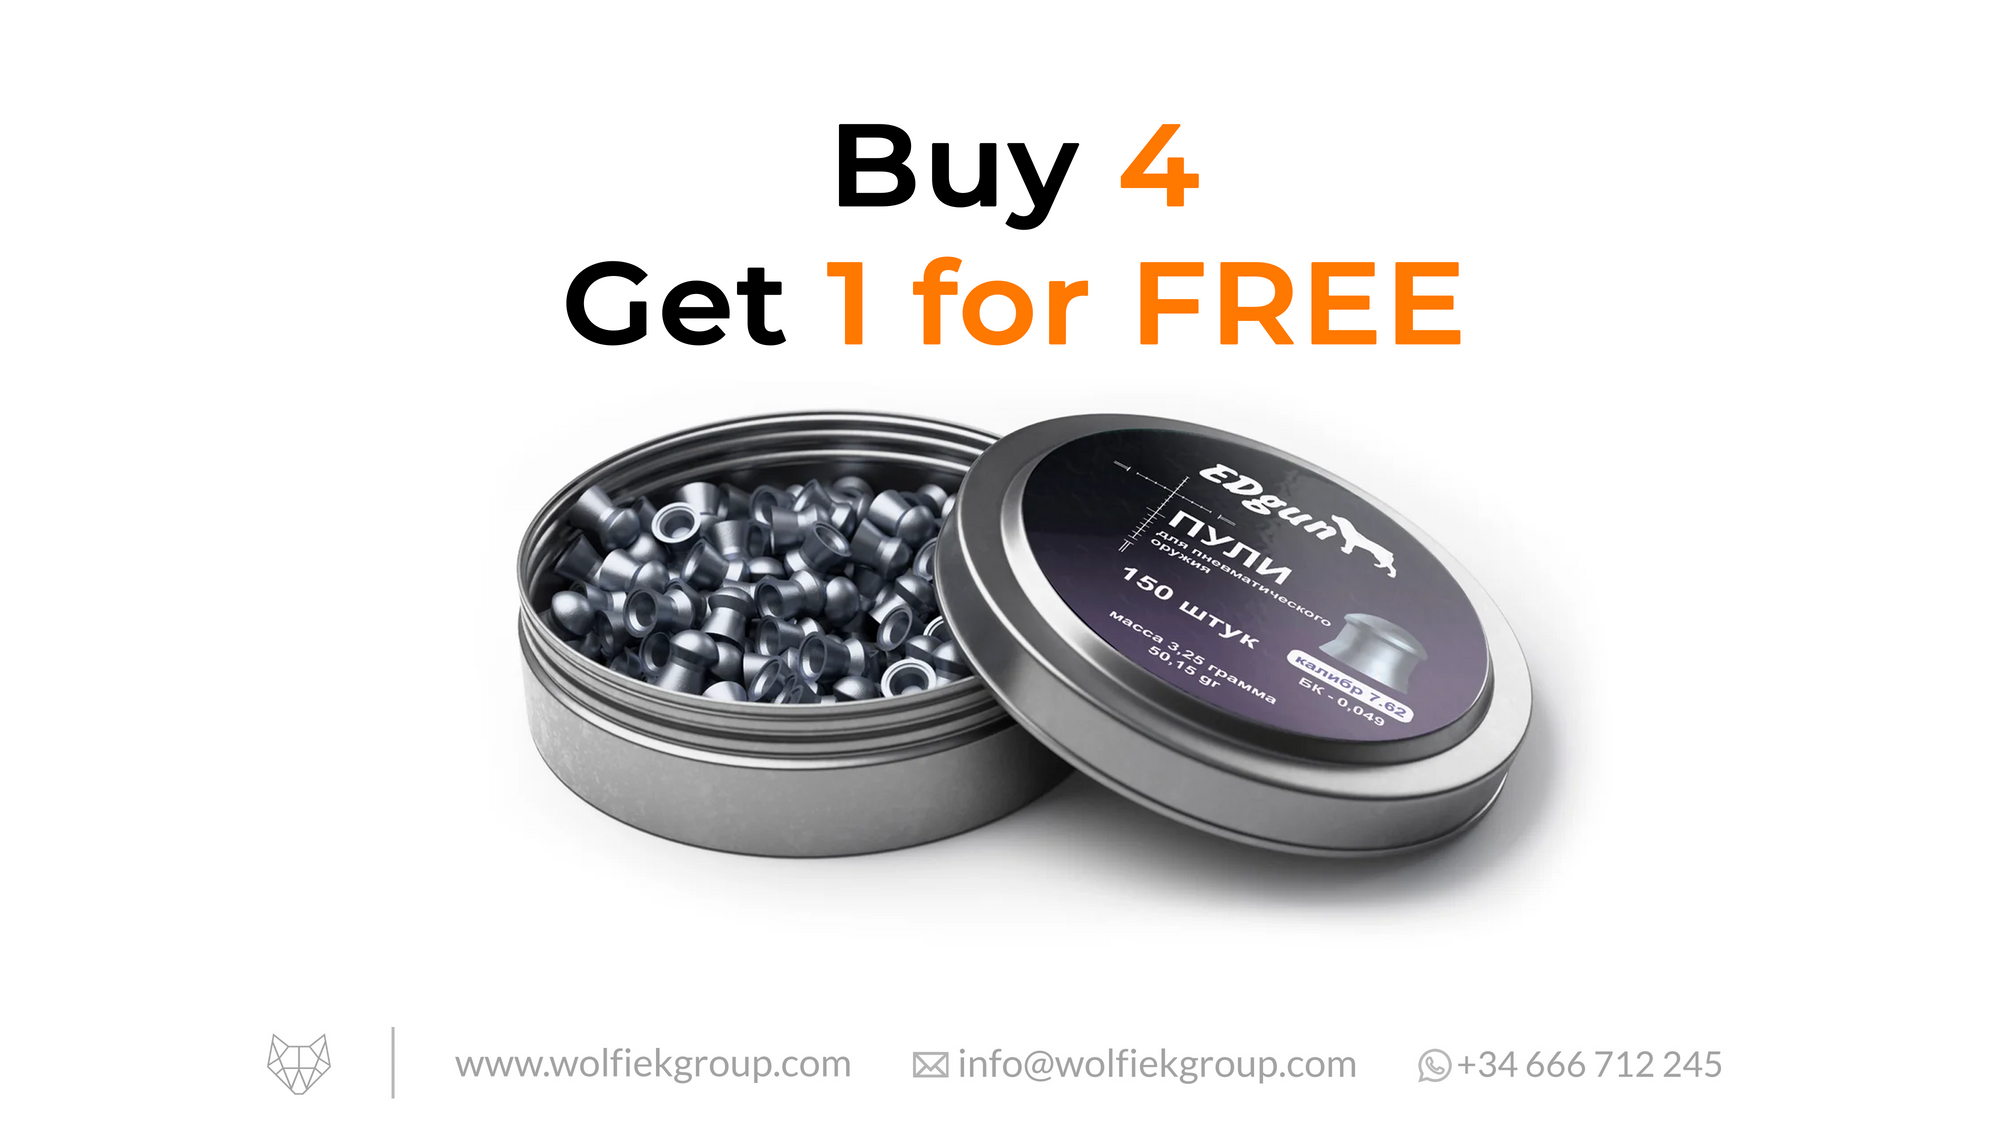 EDgun Premium Pellets Cal .30 (7,62mm) Weight: 3.25g (50,15gr) with text buy 4 get 1 for free